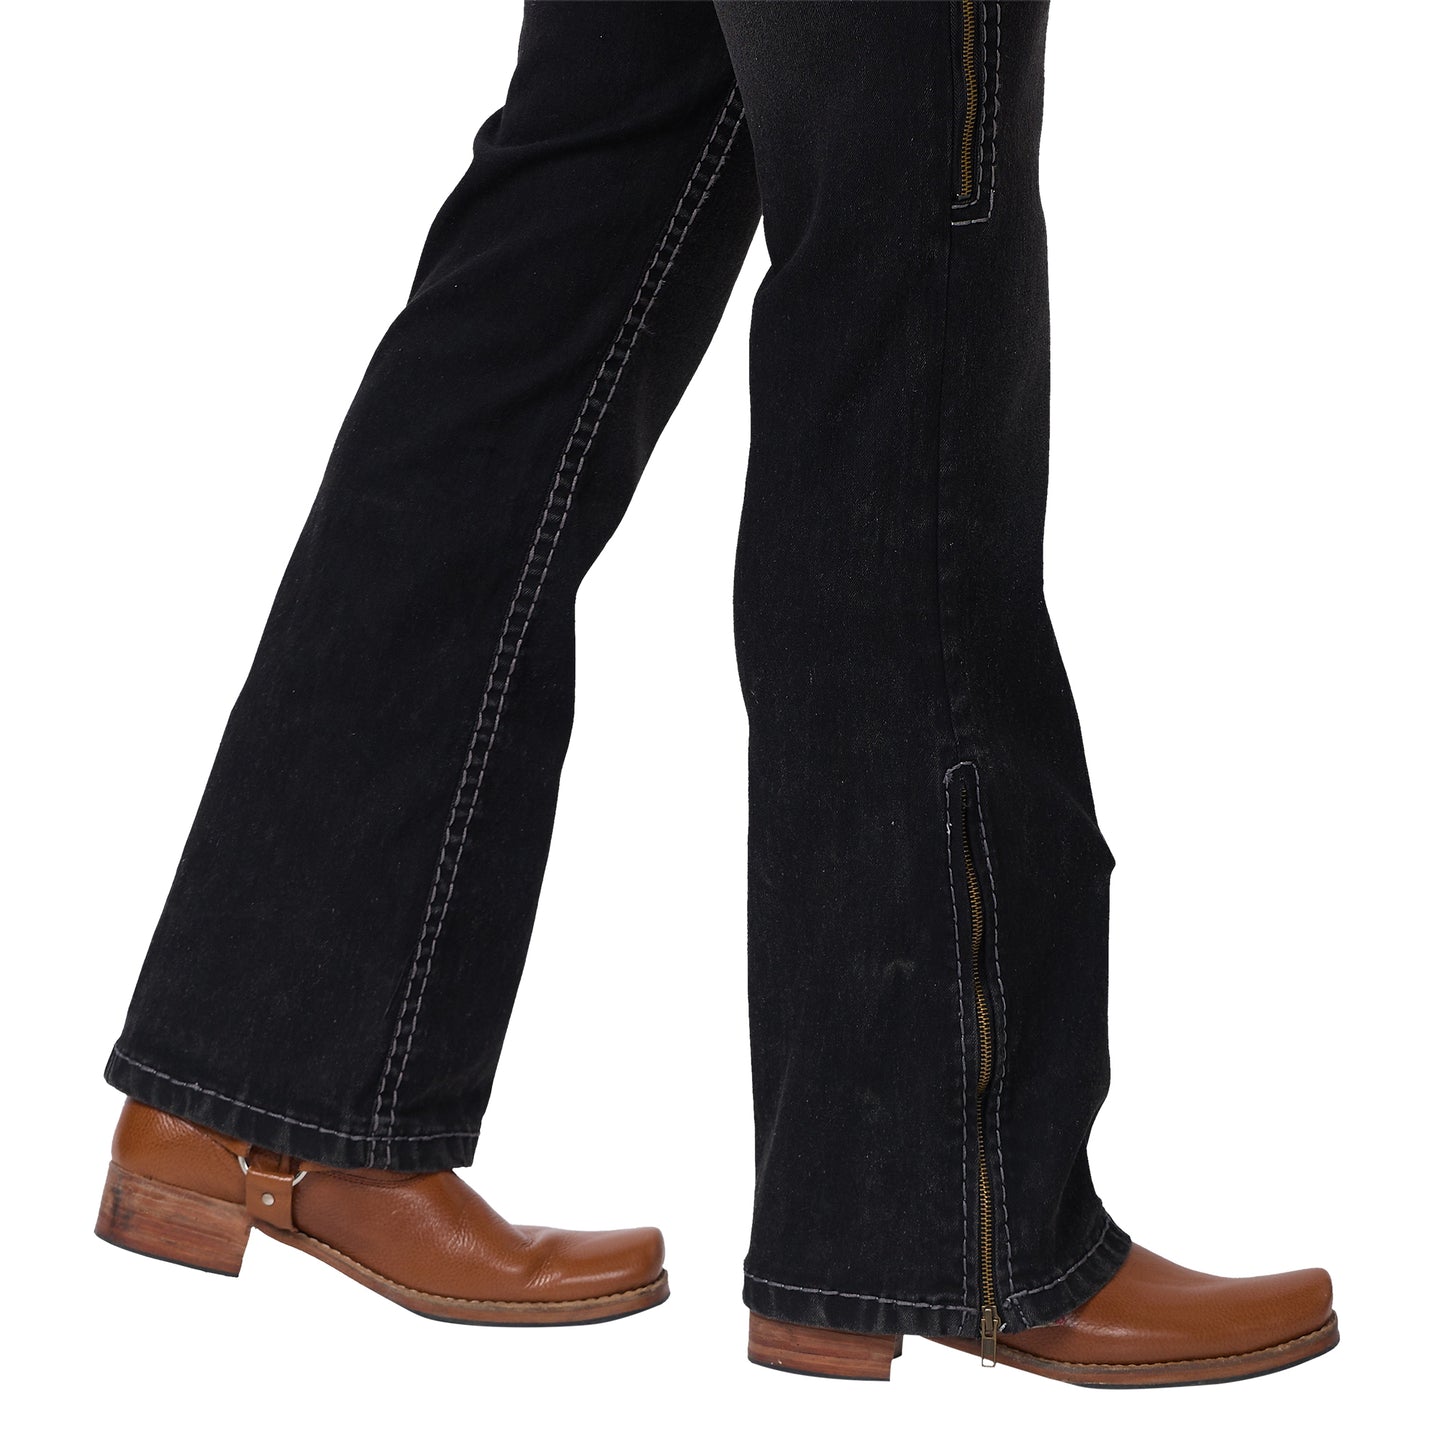 Mens Black Faded Bootcut Slim Fit Jeans With Strechable Saddle Stitch & Zipper Bottom.